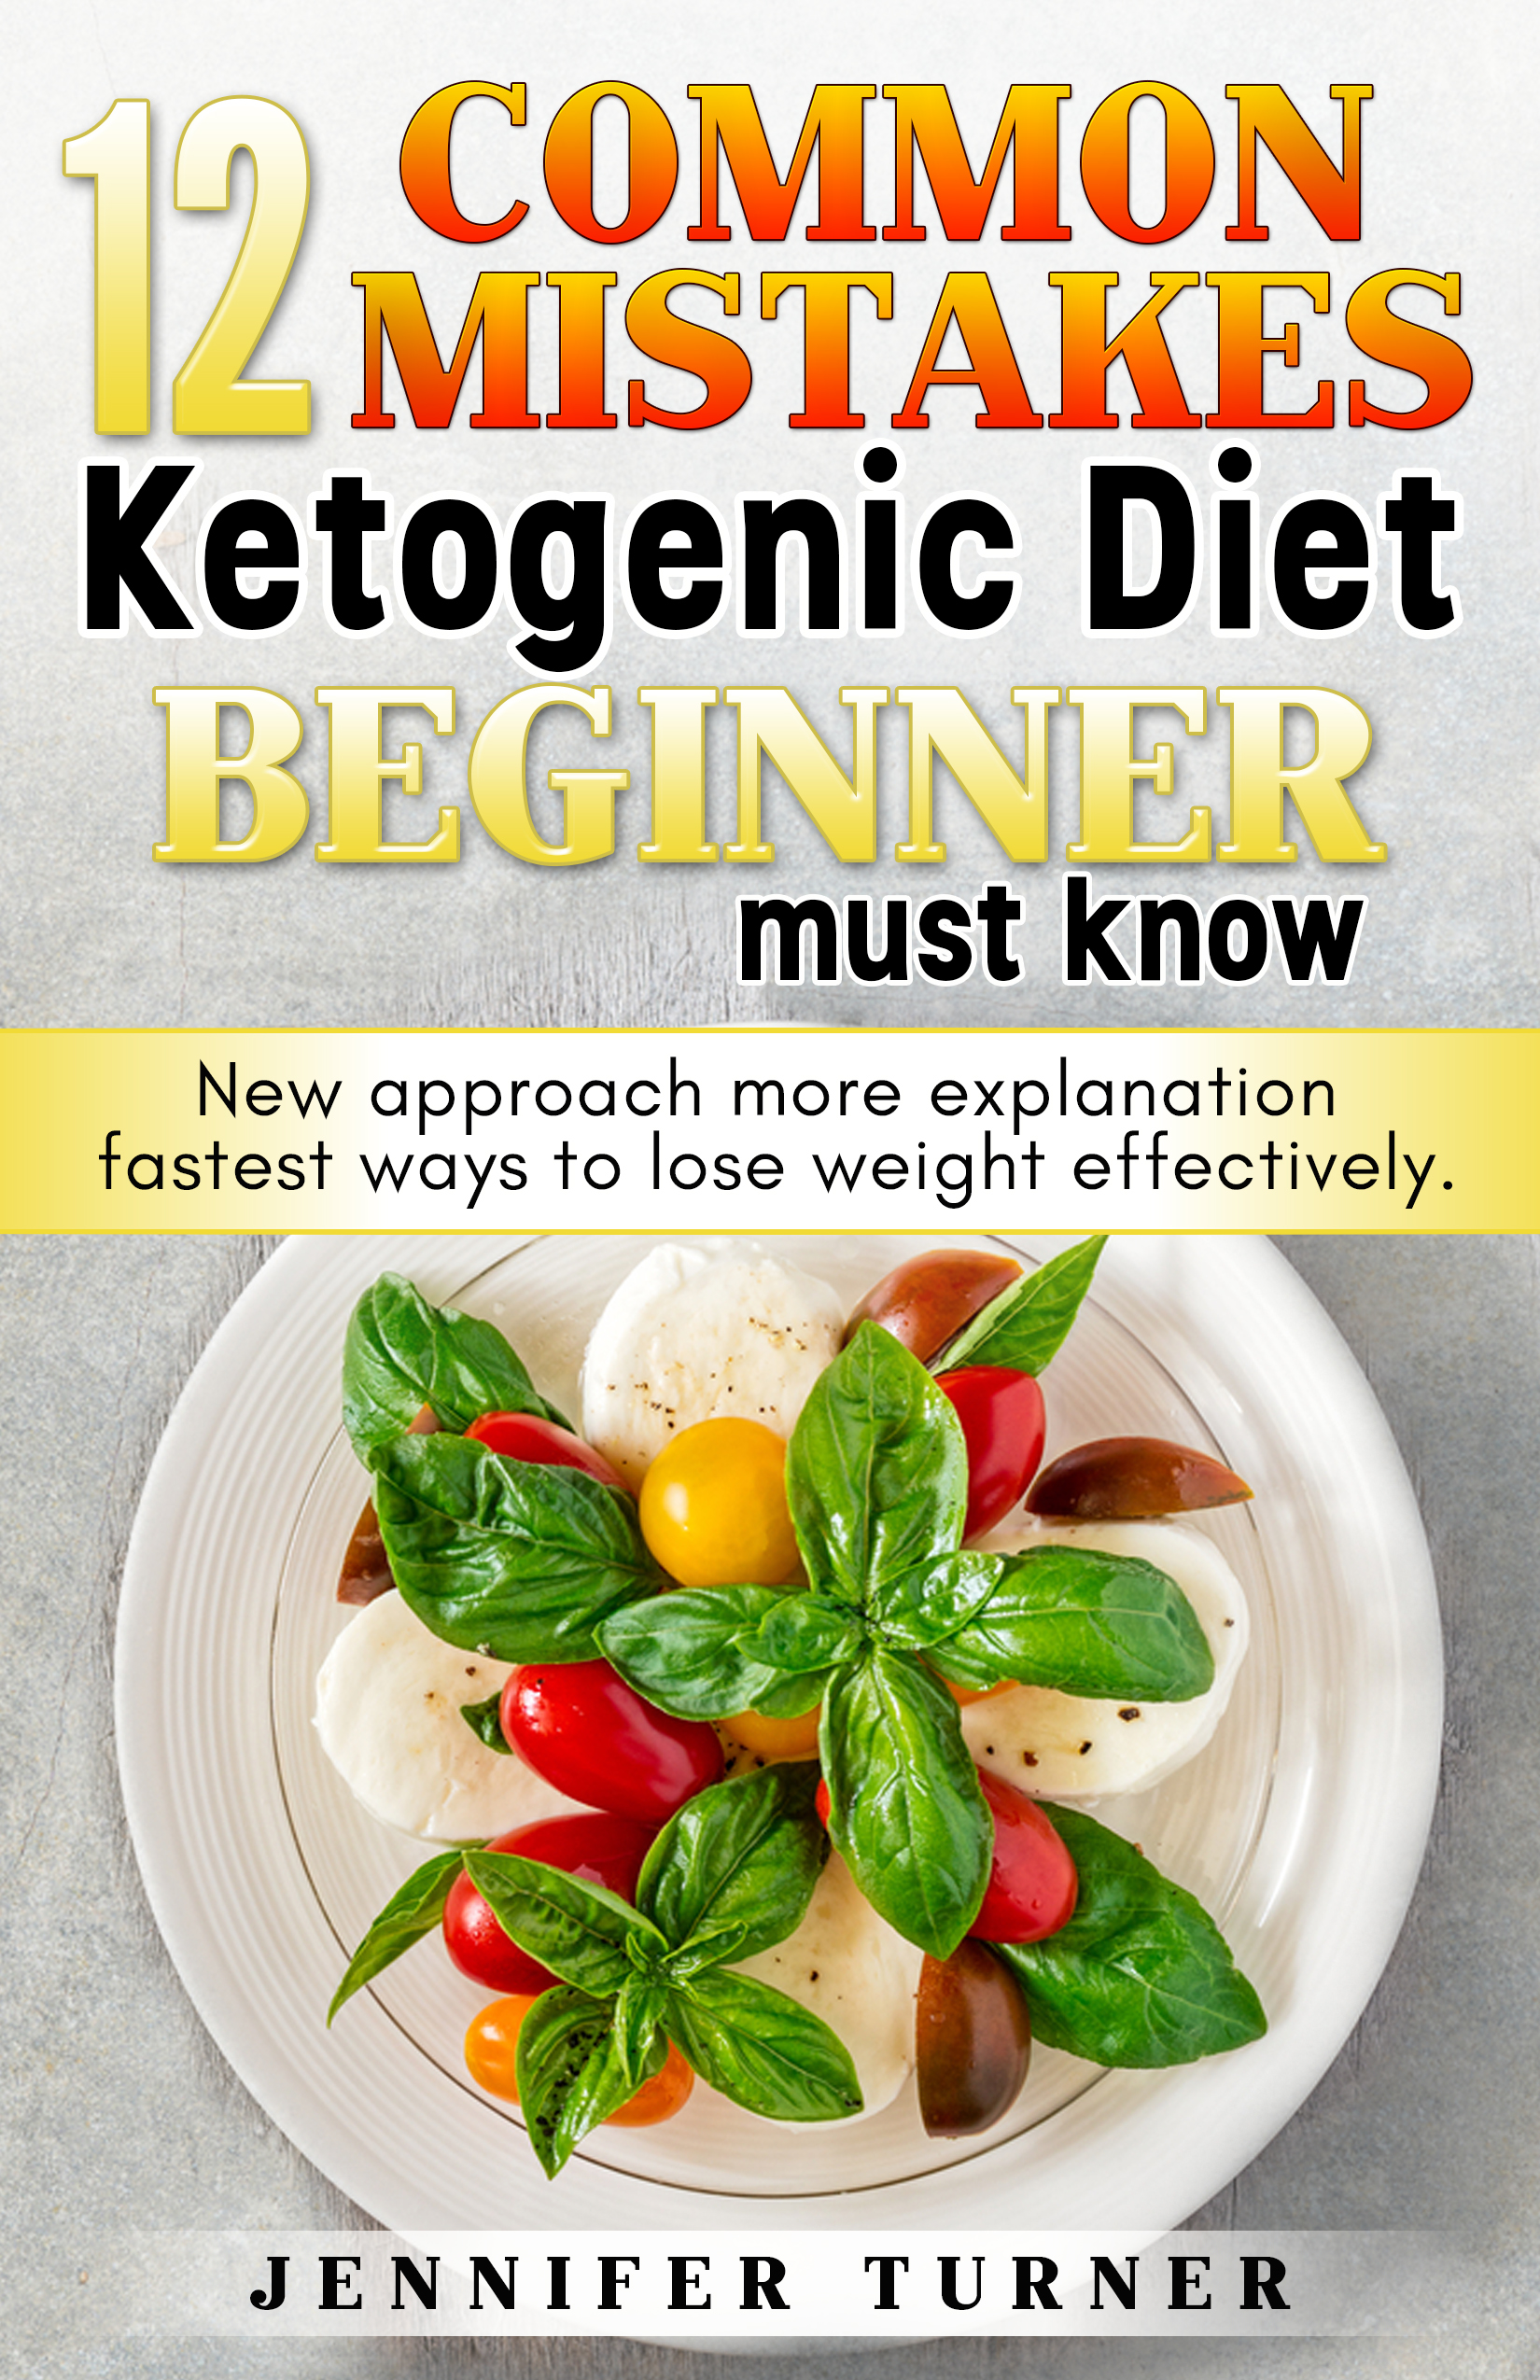 FREE: 12 Common Mistakes Ketogenic Diet Beginner Must Know by Jennifer Turner